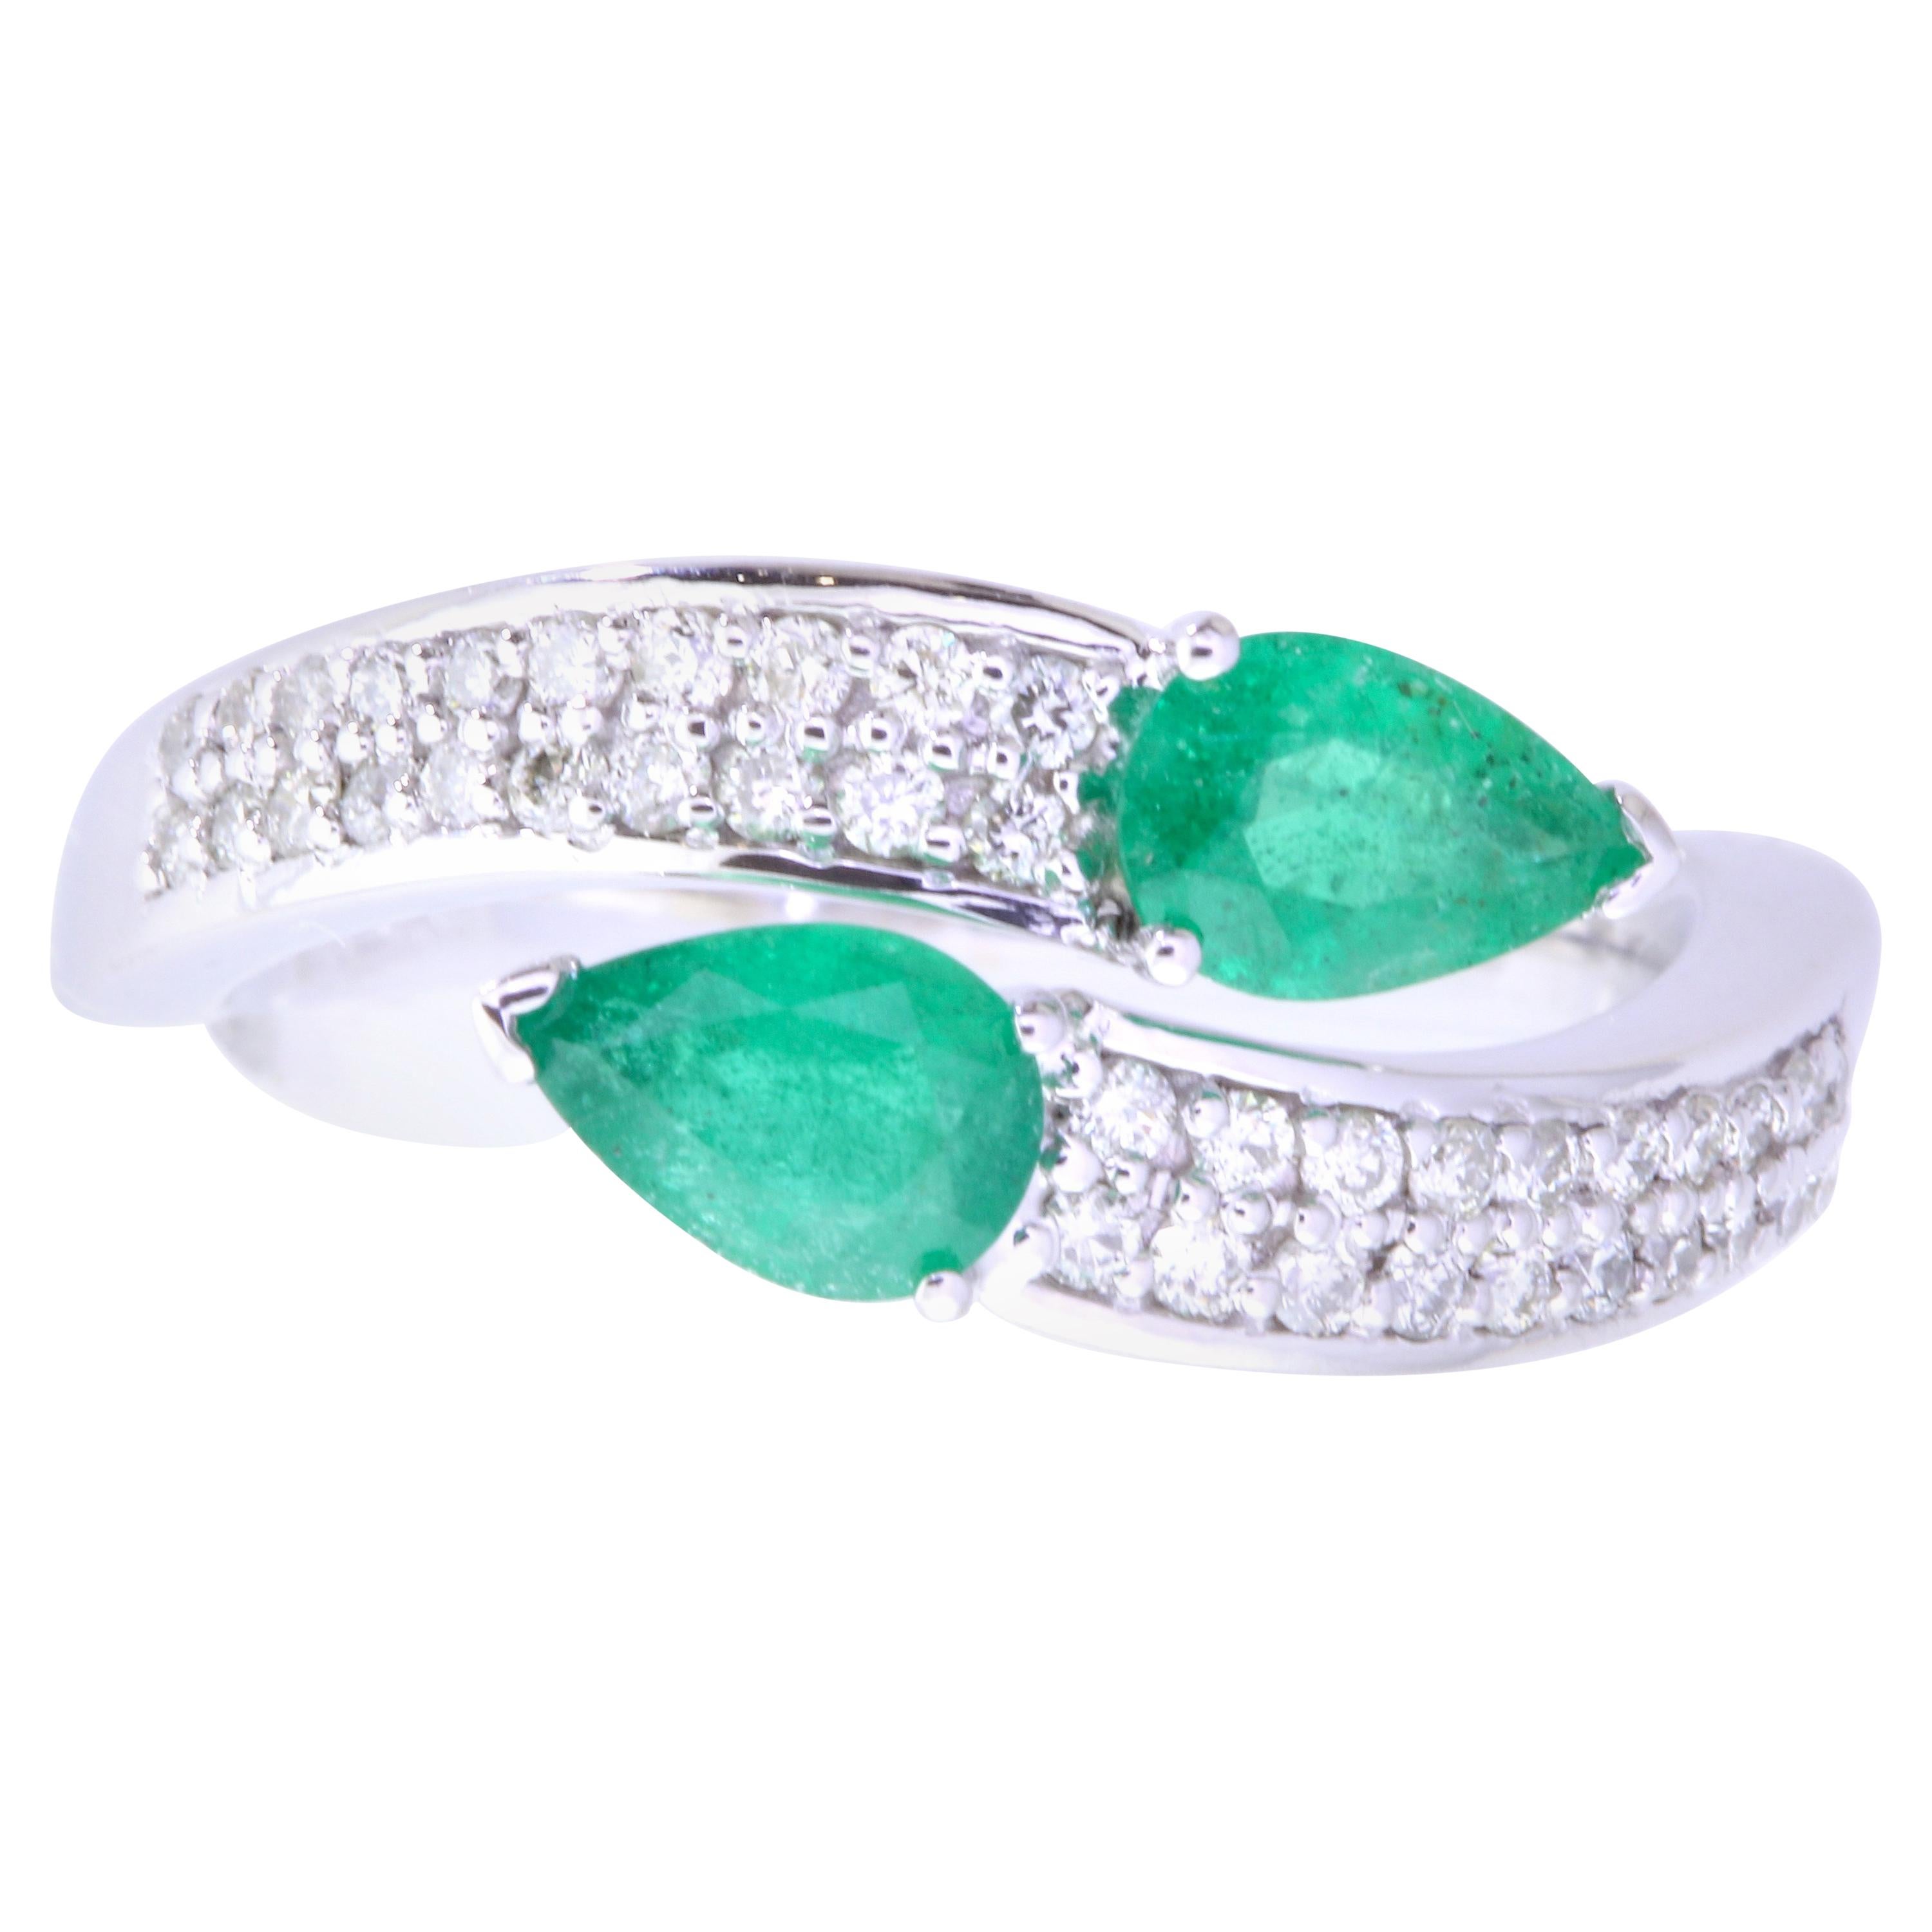 0.62 Carat Pear Shaped Emerald and White Diamond Wrap Ring